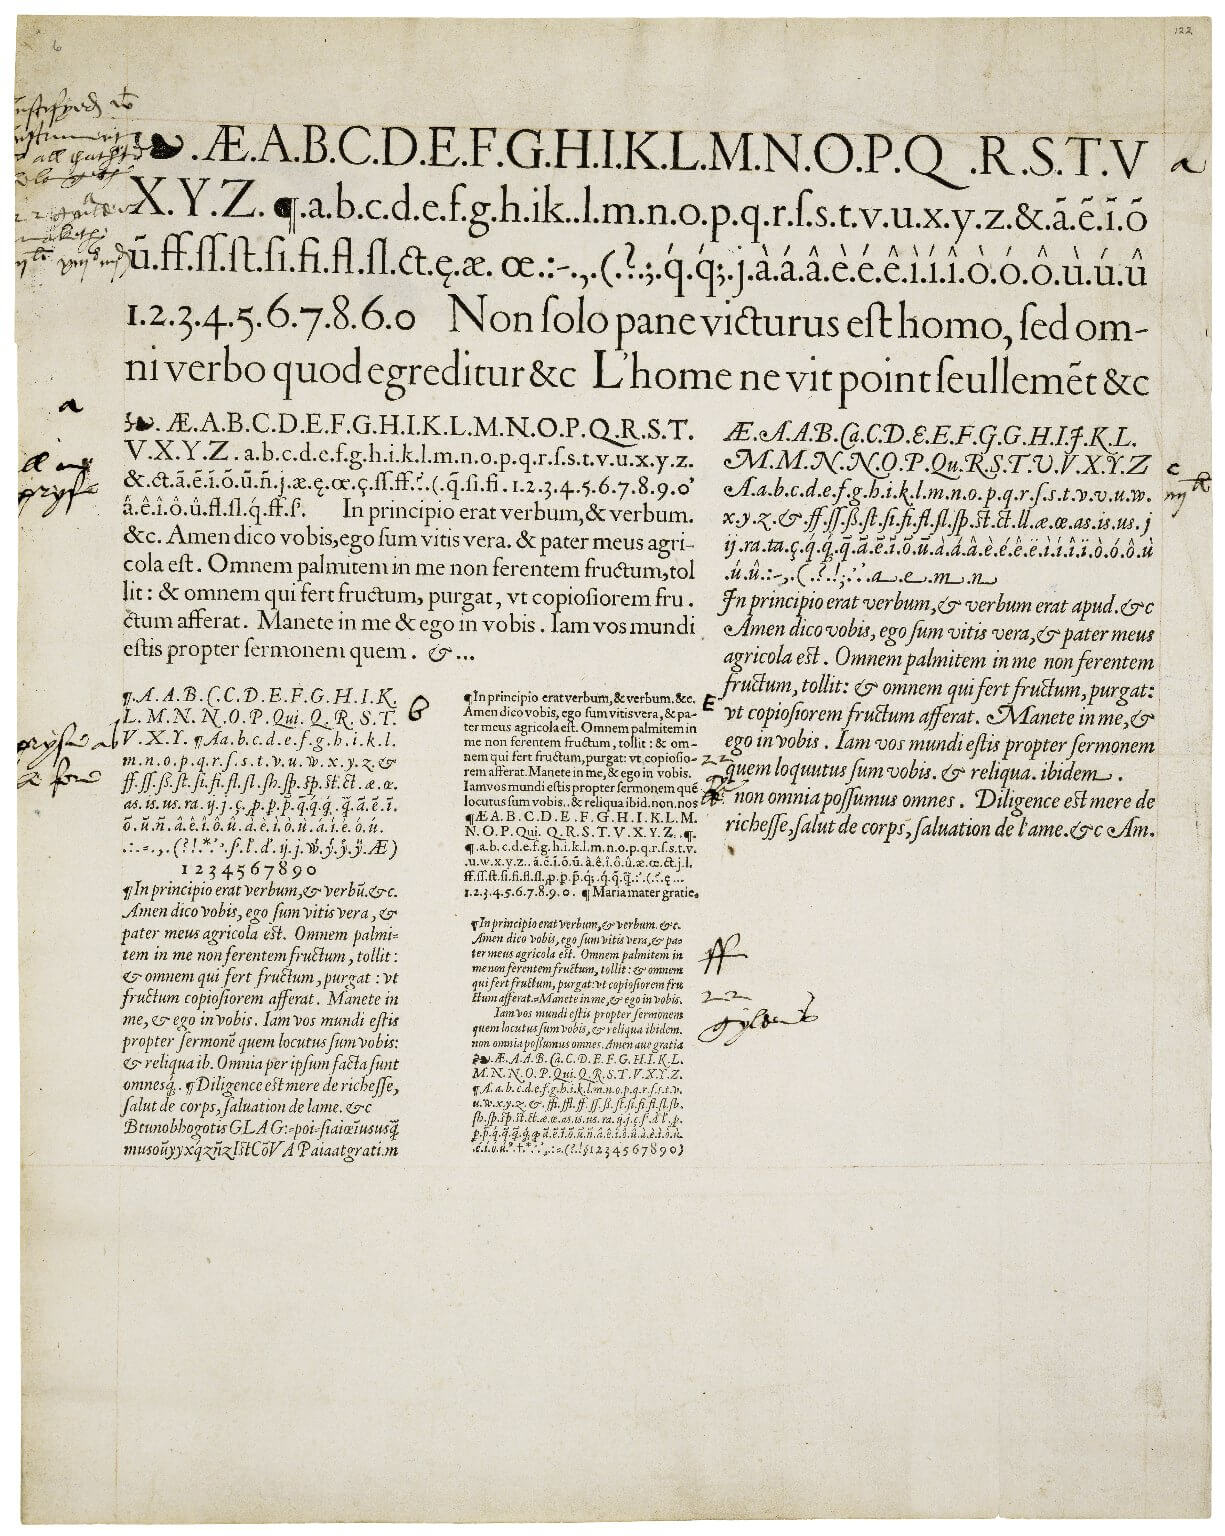 Specimen sheets are used by type-casters to show examples of the fonts they have for sale. This one shows work from François Guyot, a type-caster in Antwerp, and was used to sell his wares in England, as evidenced by the manuscript notes in English secretary hand. Careful sleuthing comparing these typefaces to those used in dated texts and to surviving records from the Plantin printing shop identified Guyot and the likely date of 1565. For more on those details, see this post from the Folger's